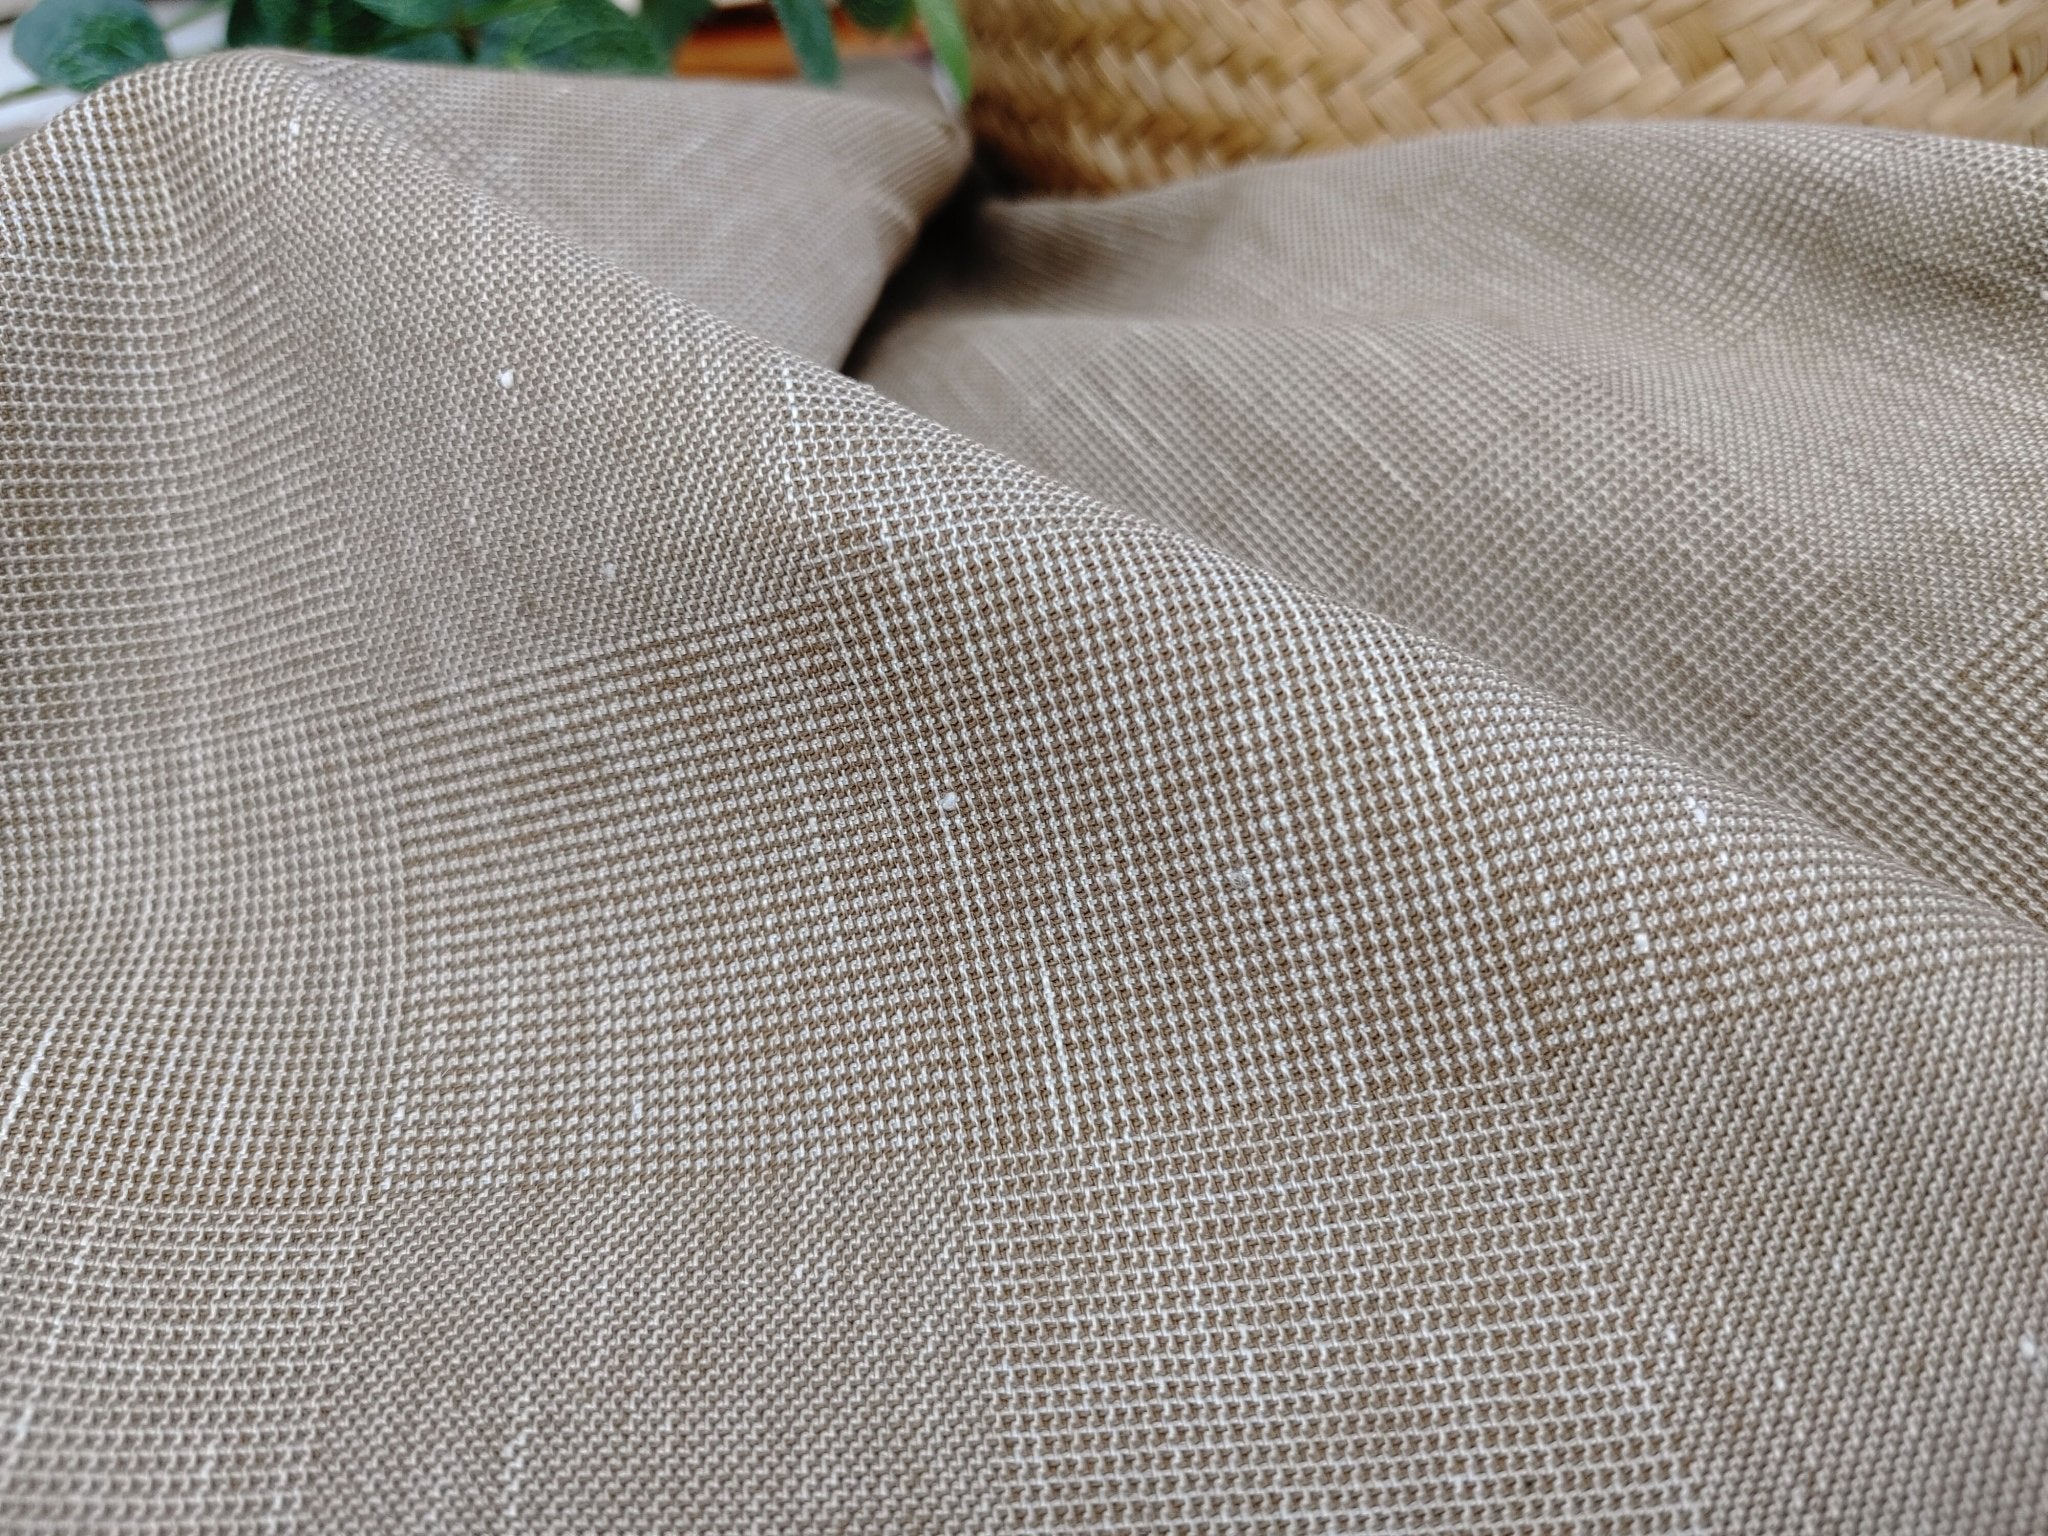 EaseBlend Beige Linen Stretch Fabric: Subtle Checkered Harmony 7295 - The Linen Lab - Beige